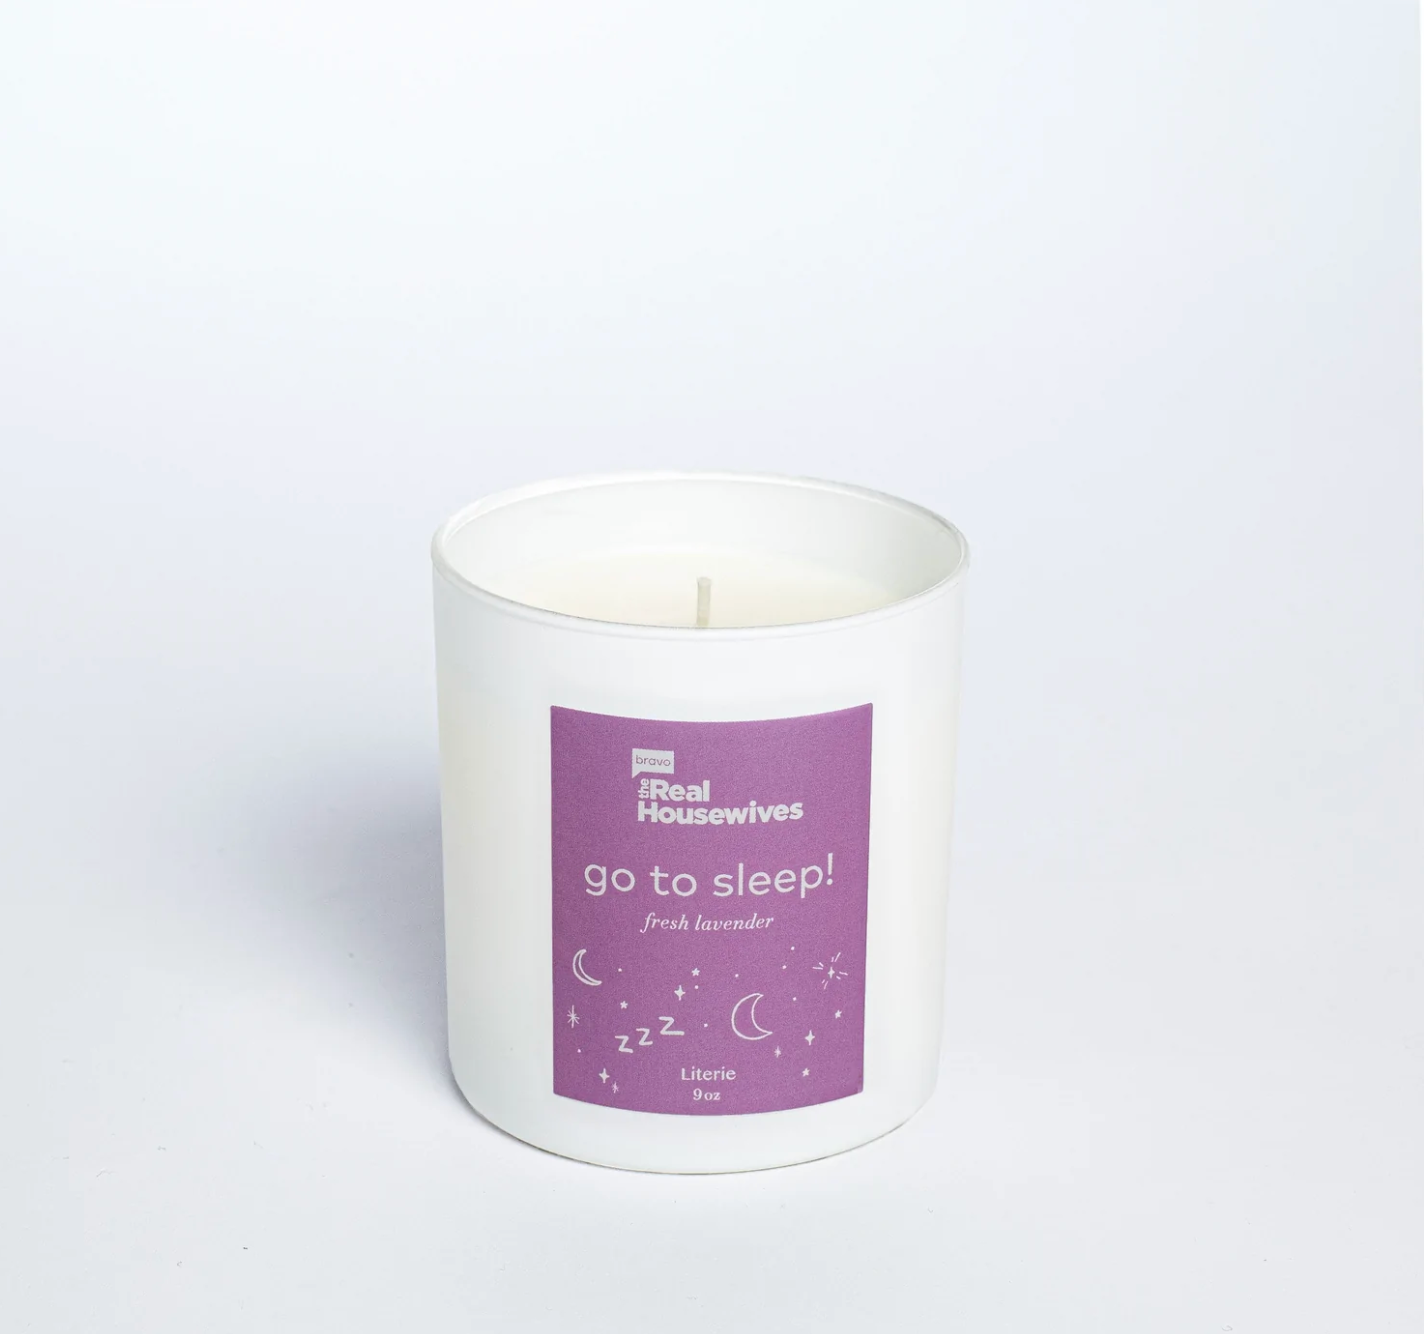 Real Housewives - Go to Sleep! - Literie Candles